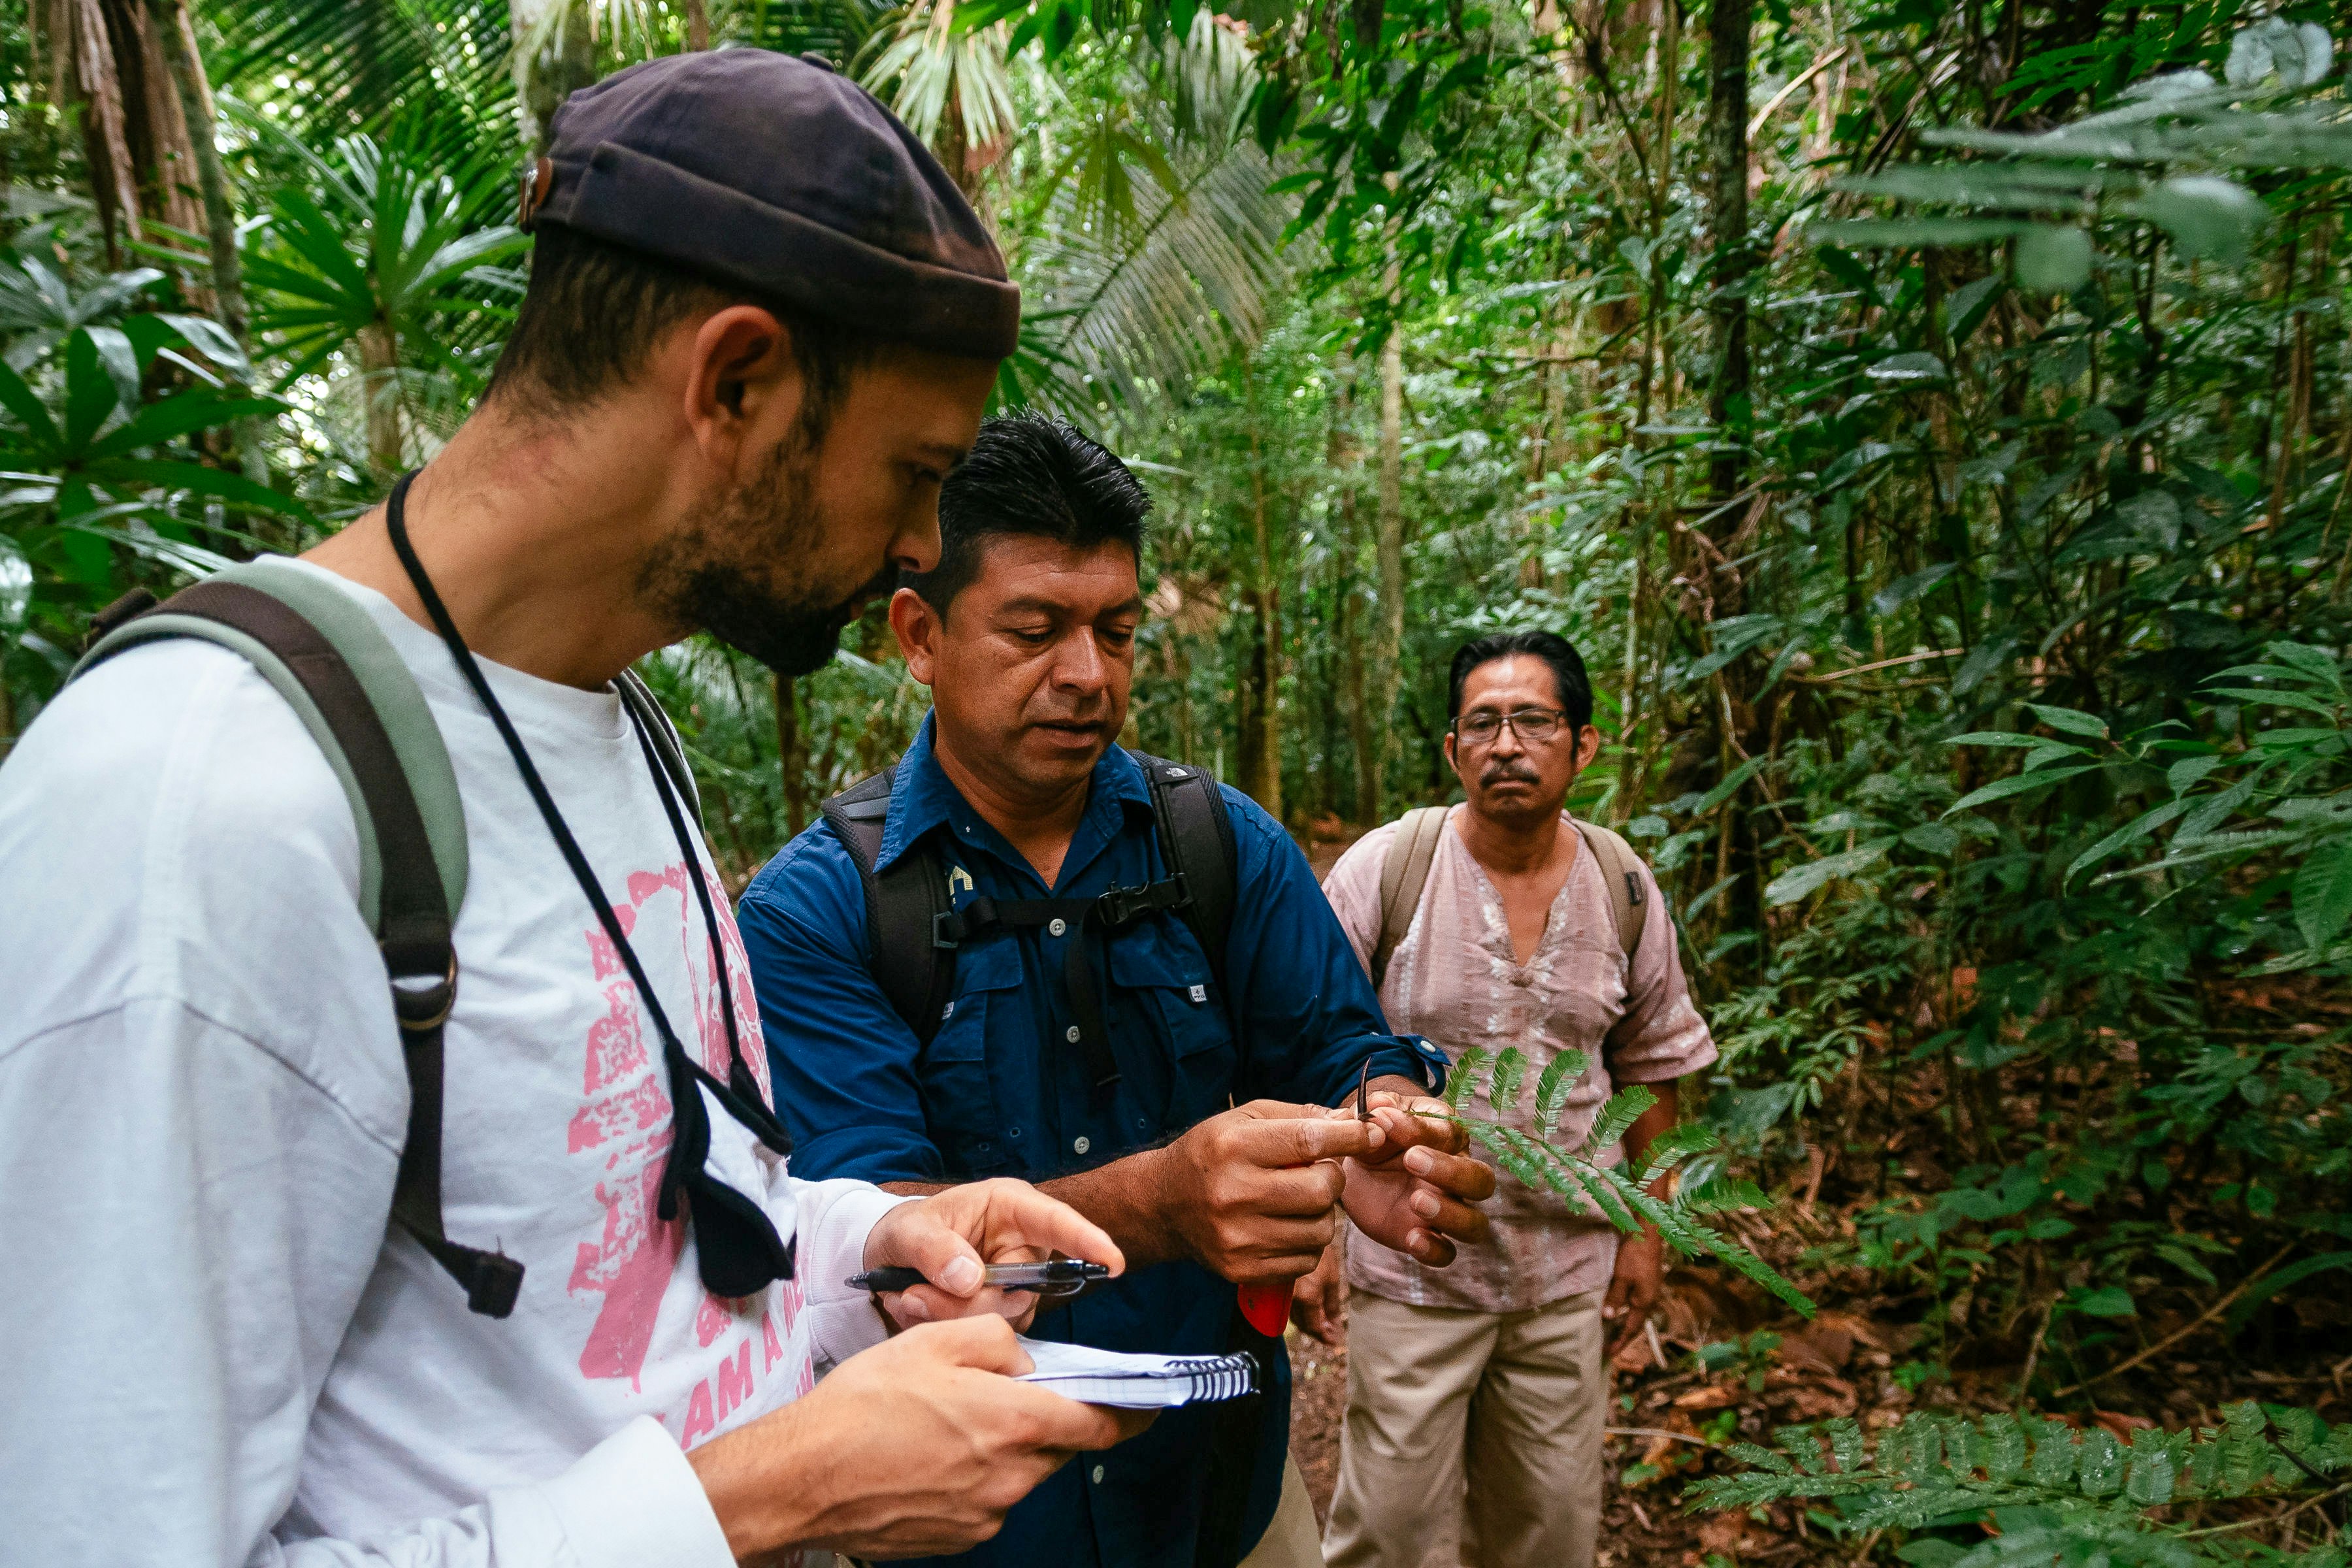 Guided tour of Elijio Panti National Park with a practicing Mayan healer who’s well-versed in the native flora.